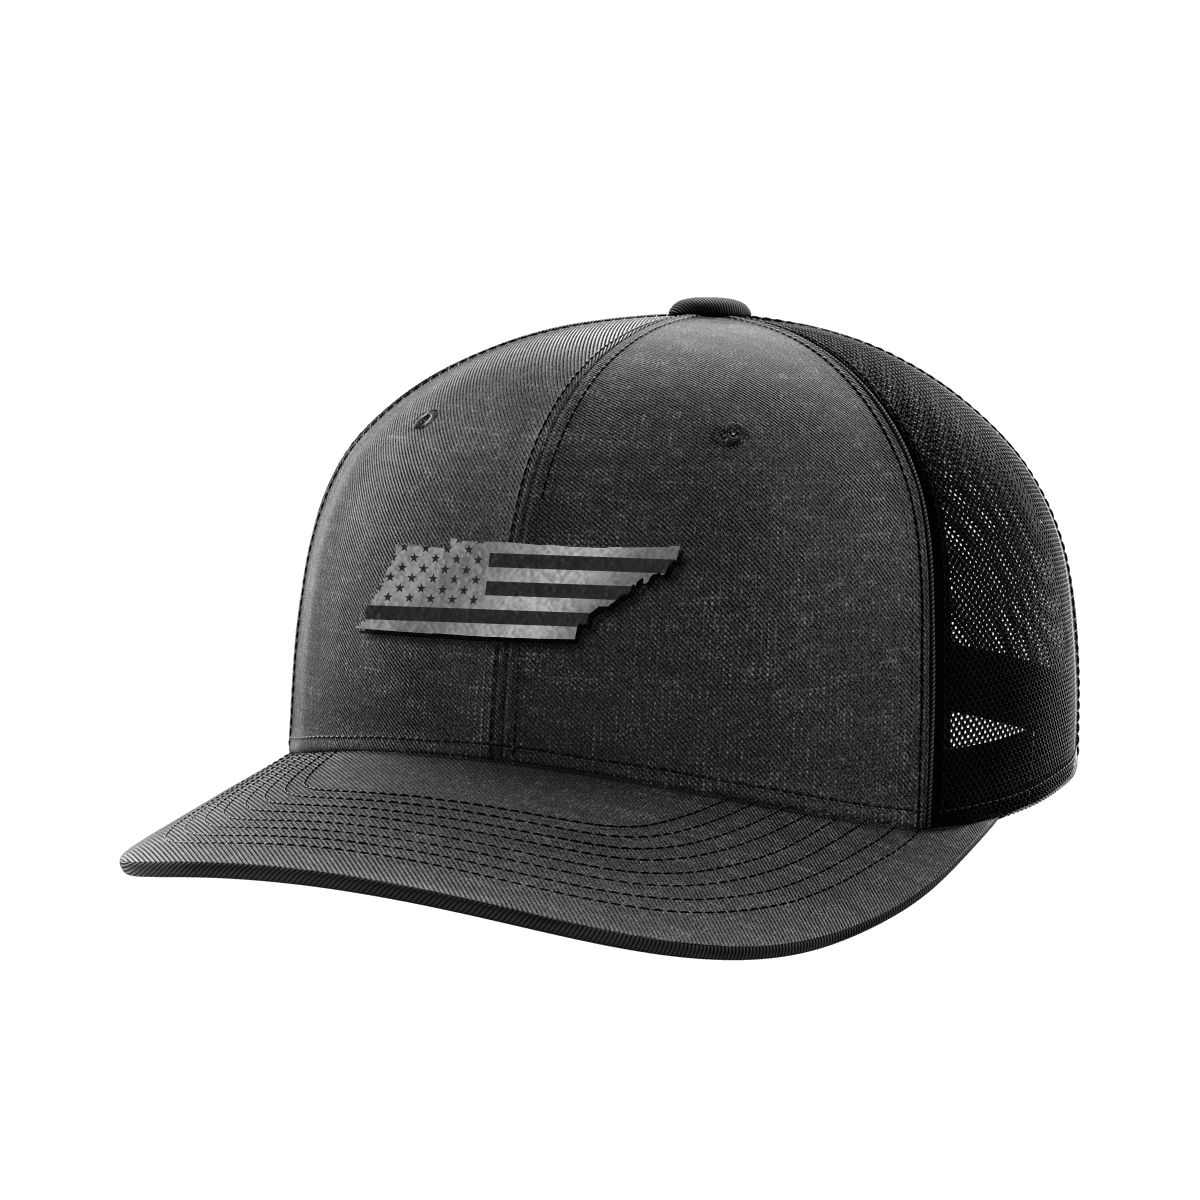 Tennessee United Hats - Greater Half